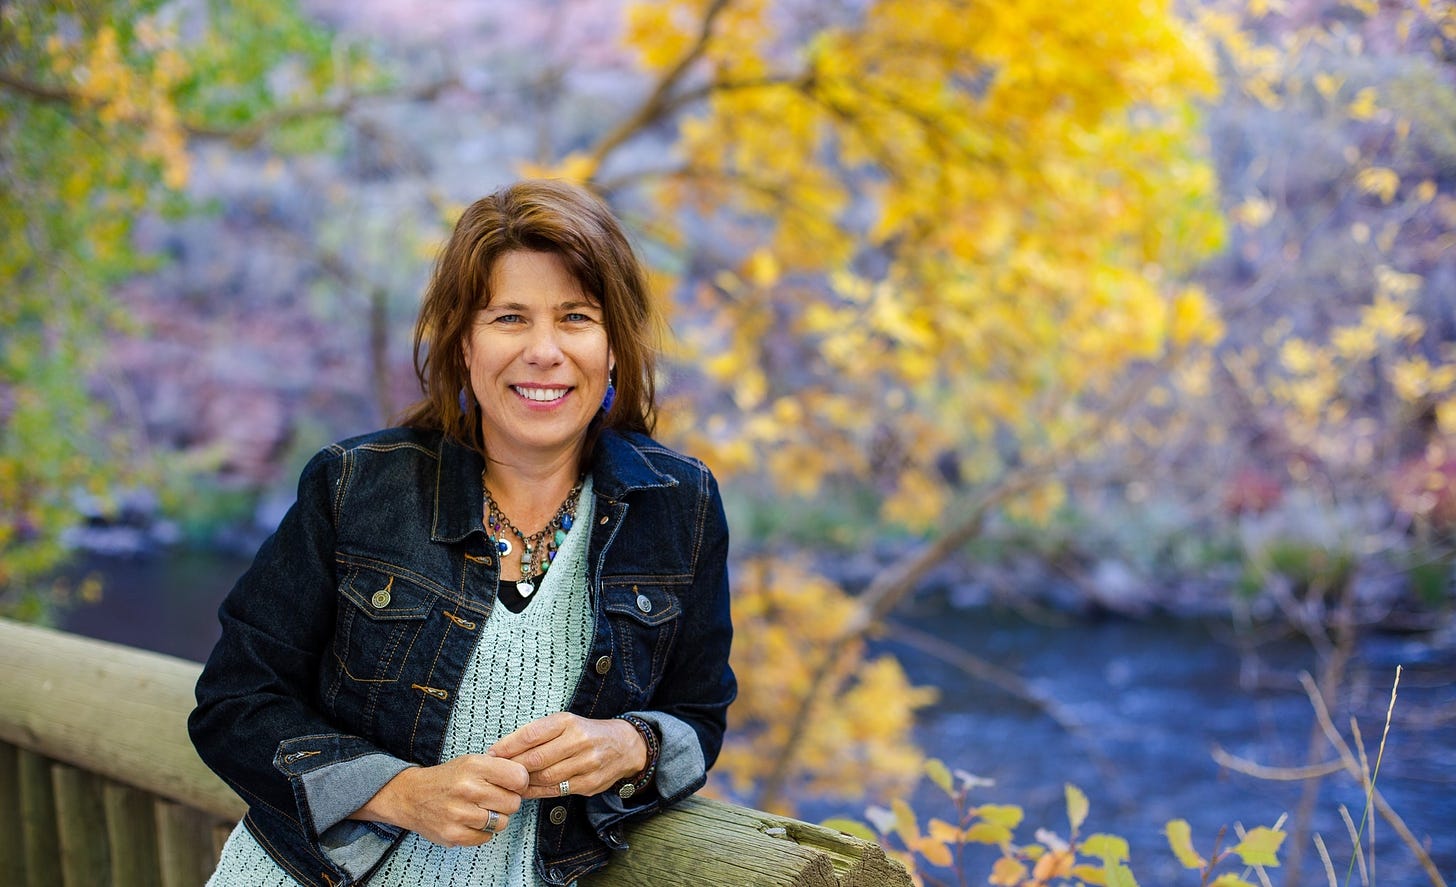 laura pritchett leaning against a bridge, fall colored trees in background